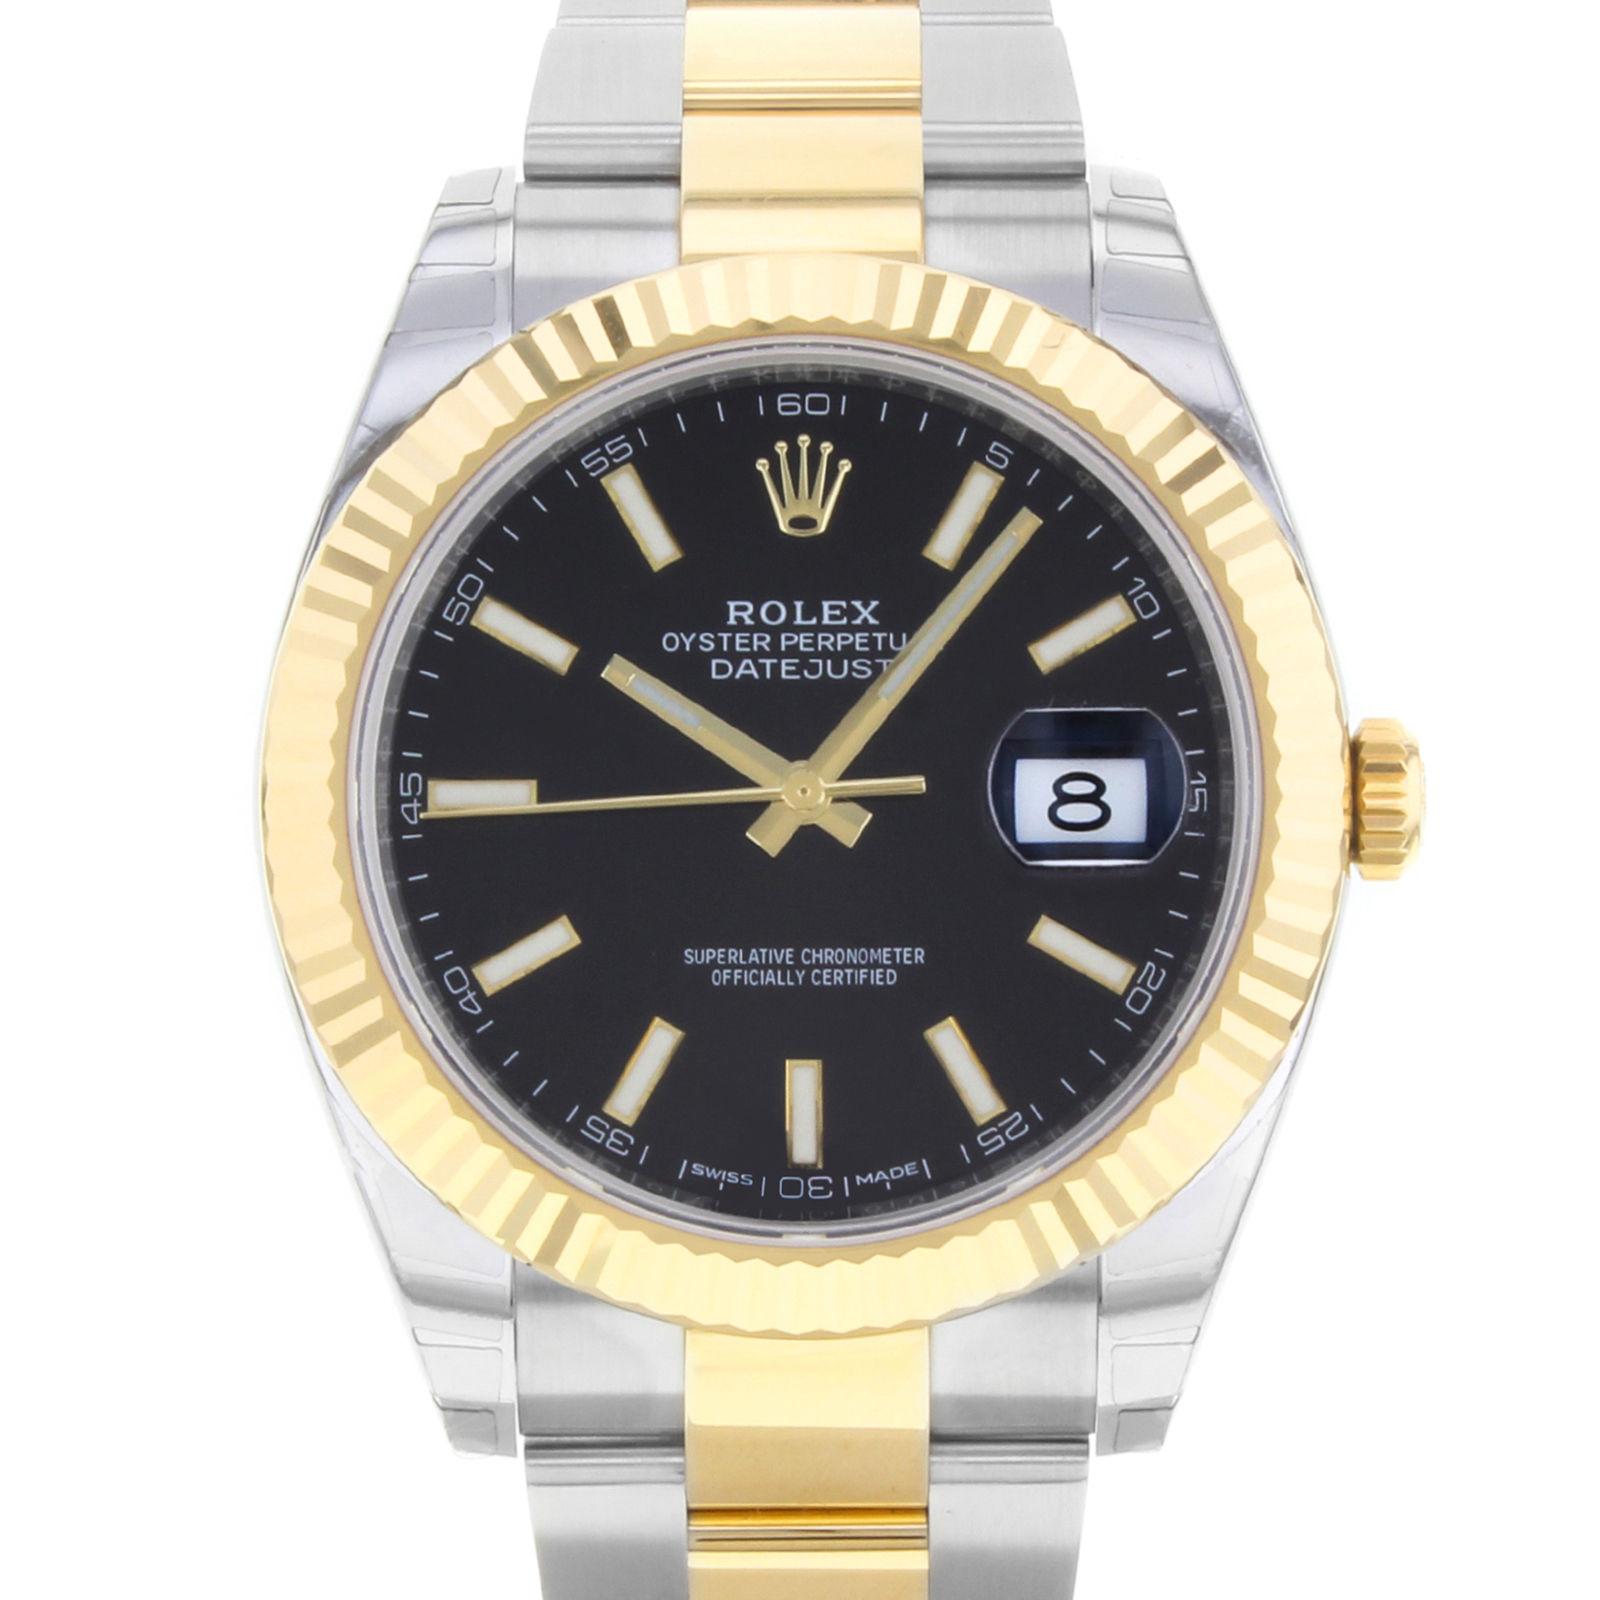 (15818)
This brand new Rolex Datejust 41 126333 bkio is a beautiful men's timepiece that is powered by an automatic movement which is cased in a stainless steel case. It has a round shape face, date dial and has hand sticks style markers. It is